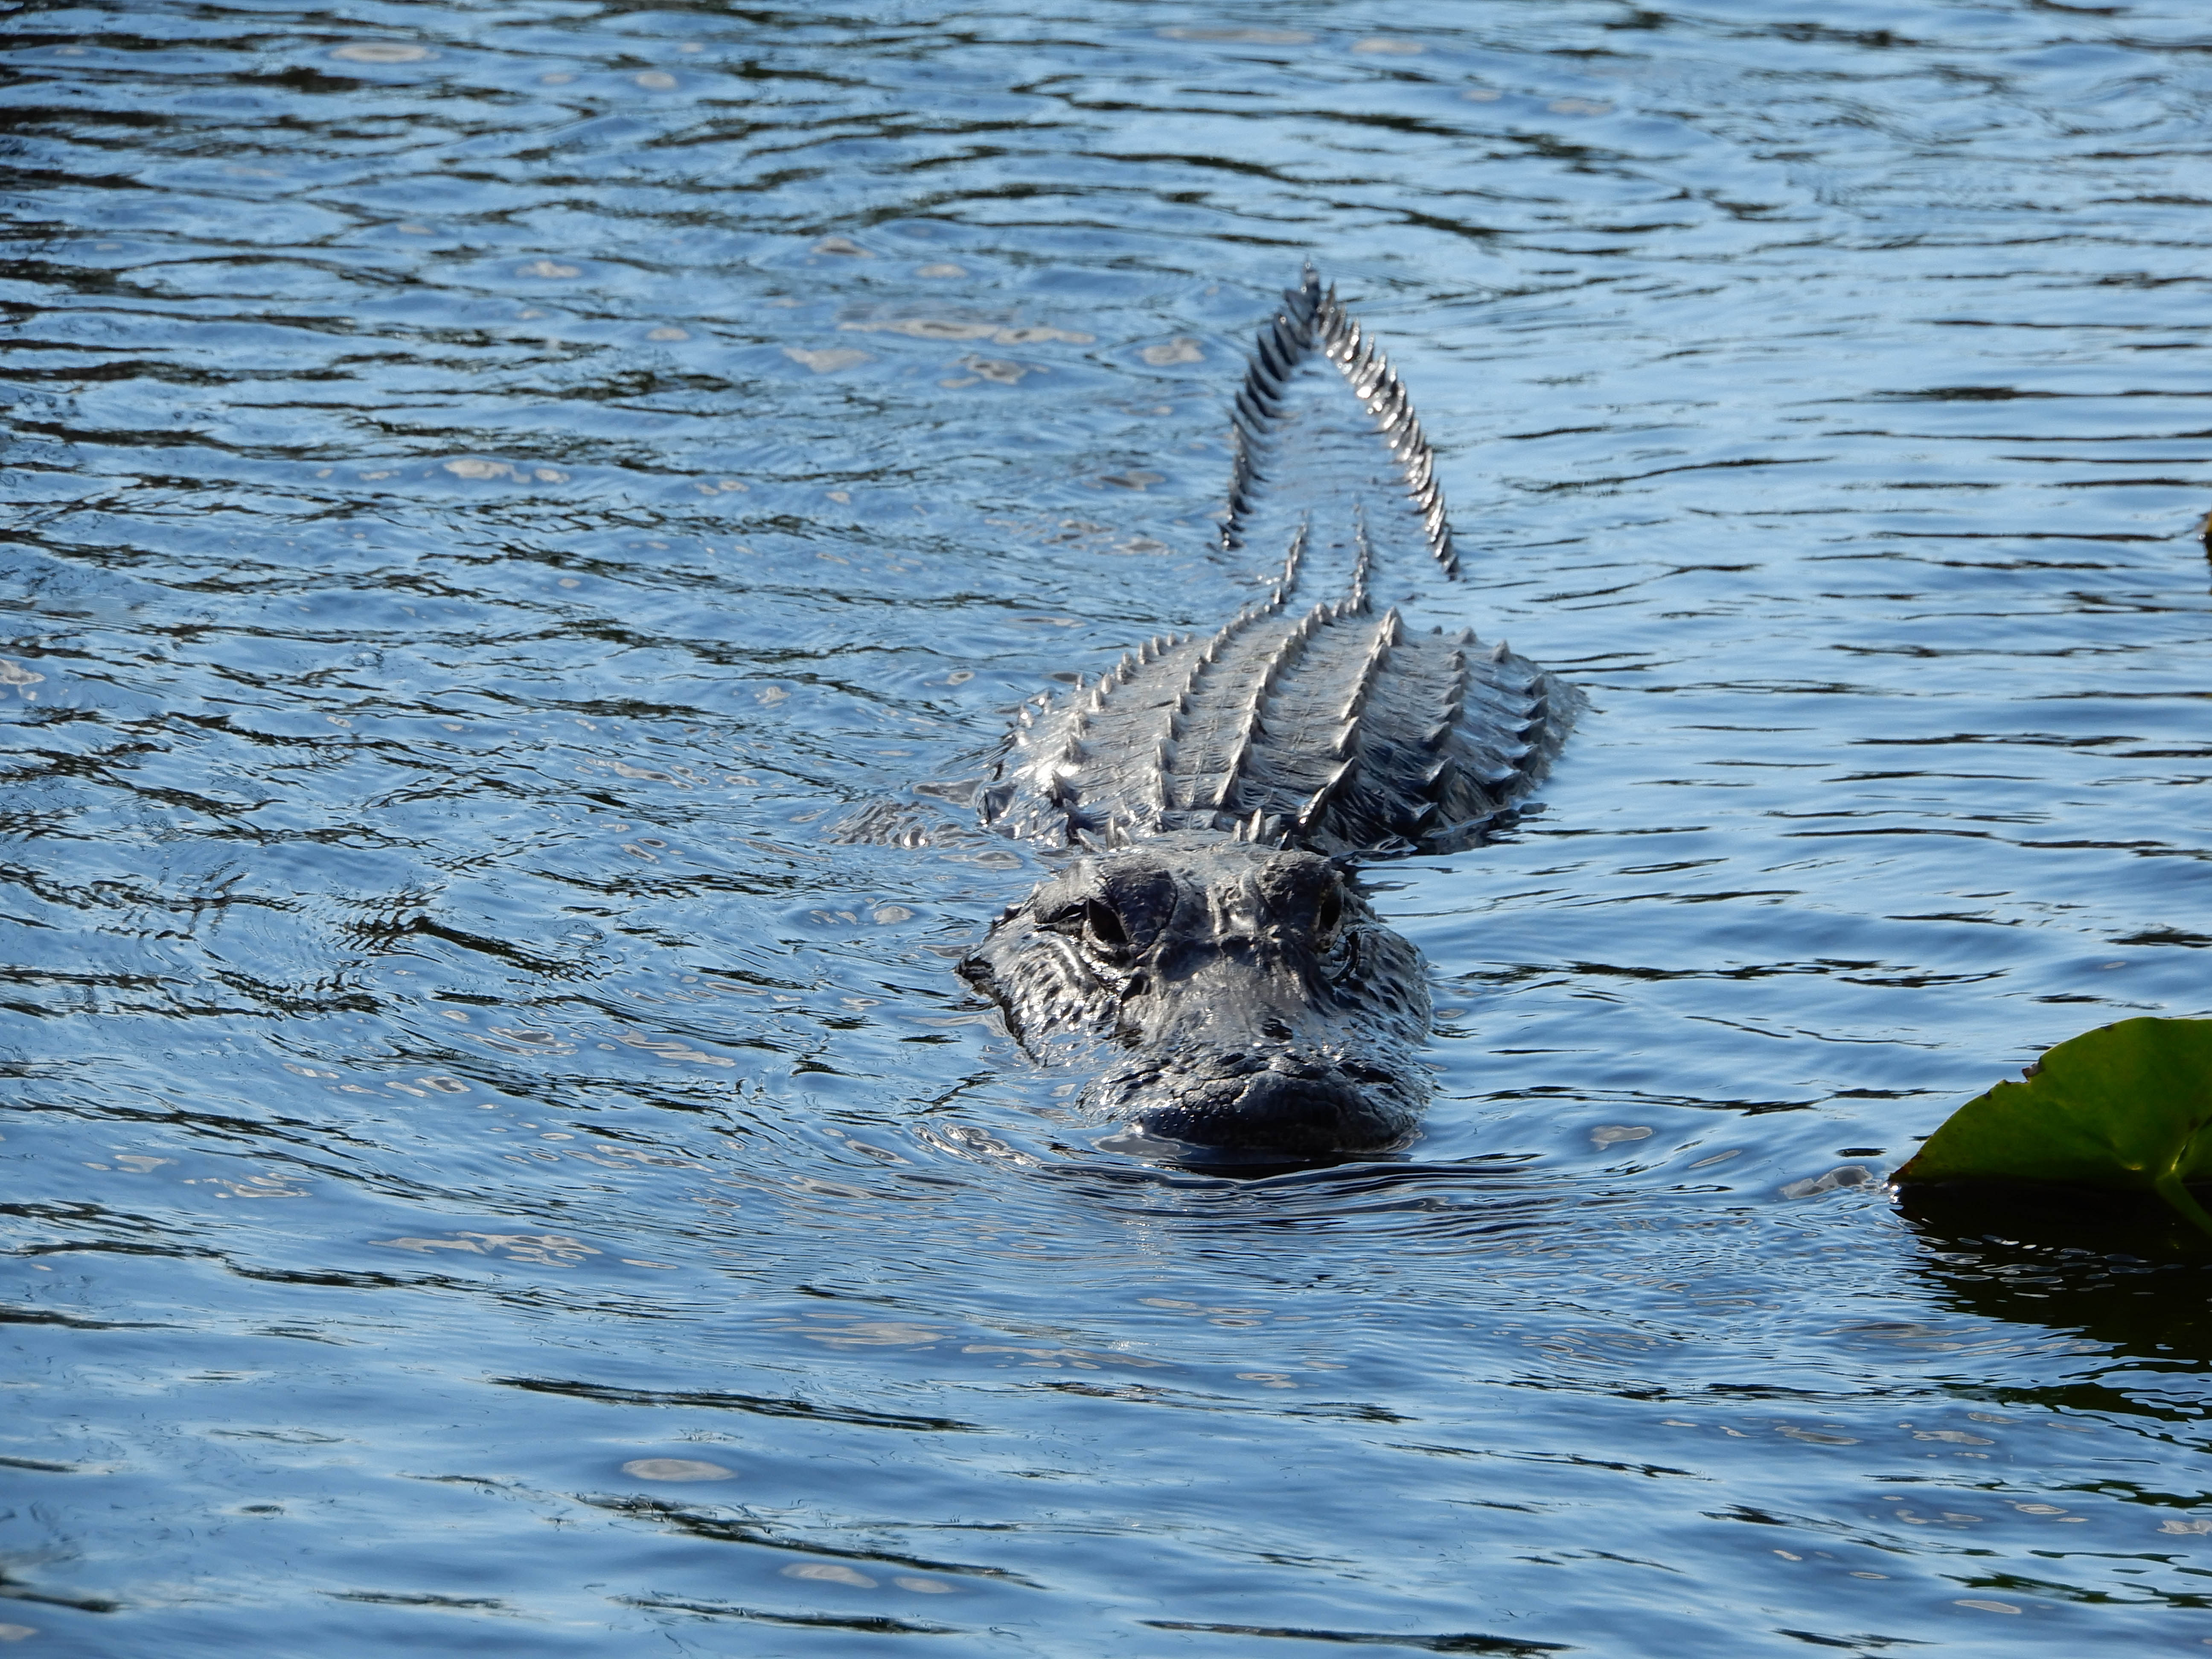 The Everglades is the only place in the world where both alligators & crocodiles. Less water = less food for the gator. They weigh < 20% than their counterparts.  Among the worst threats are the changed water flow caused by the dams & canals built to divert water away from sugar farms & development